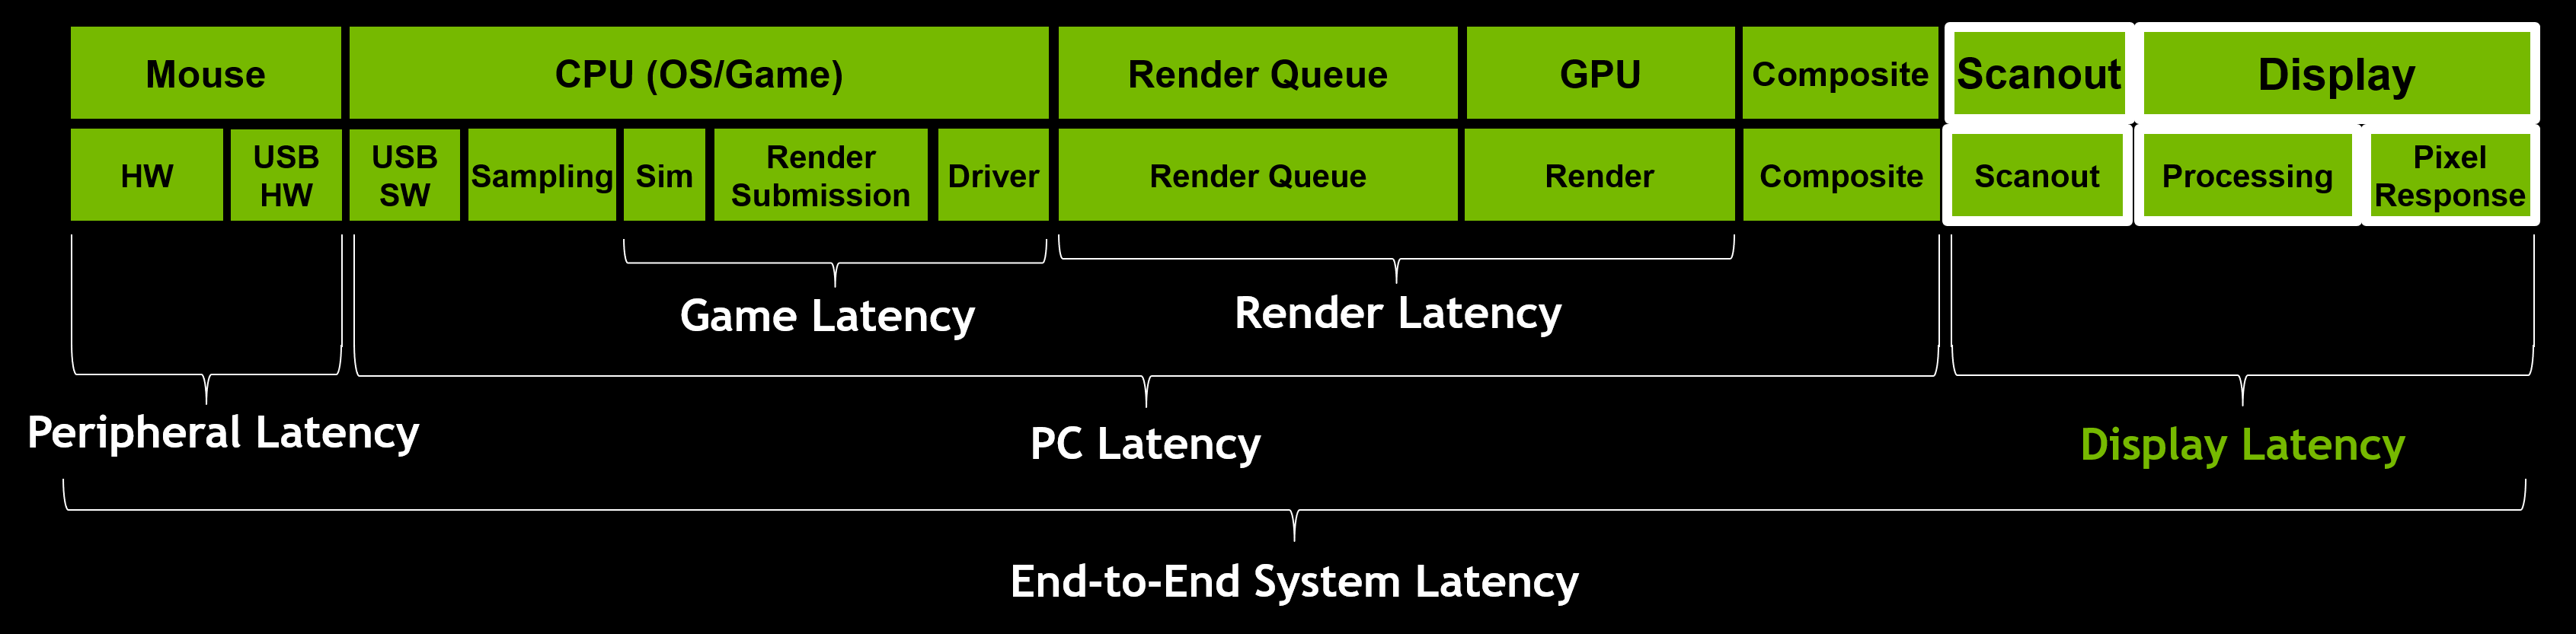 How To Reduce Lag A Guide To Better System Latency